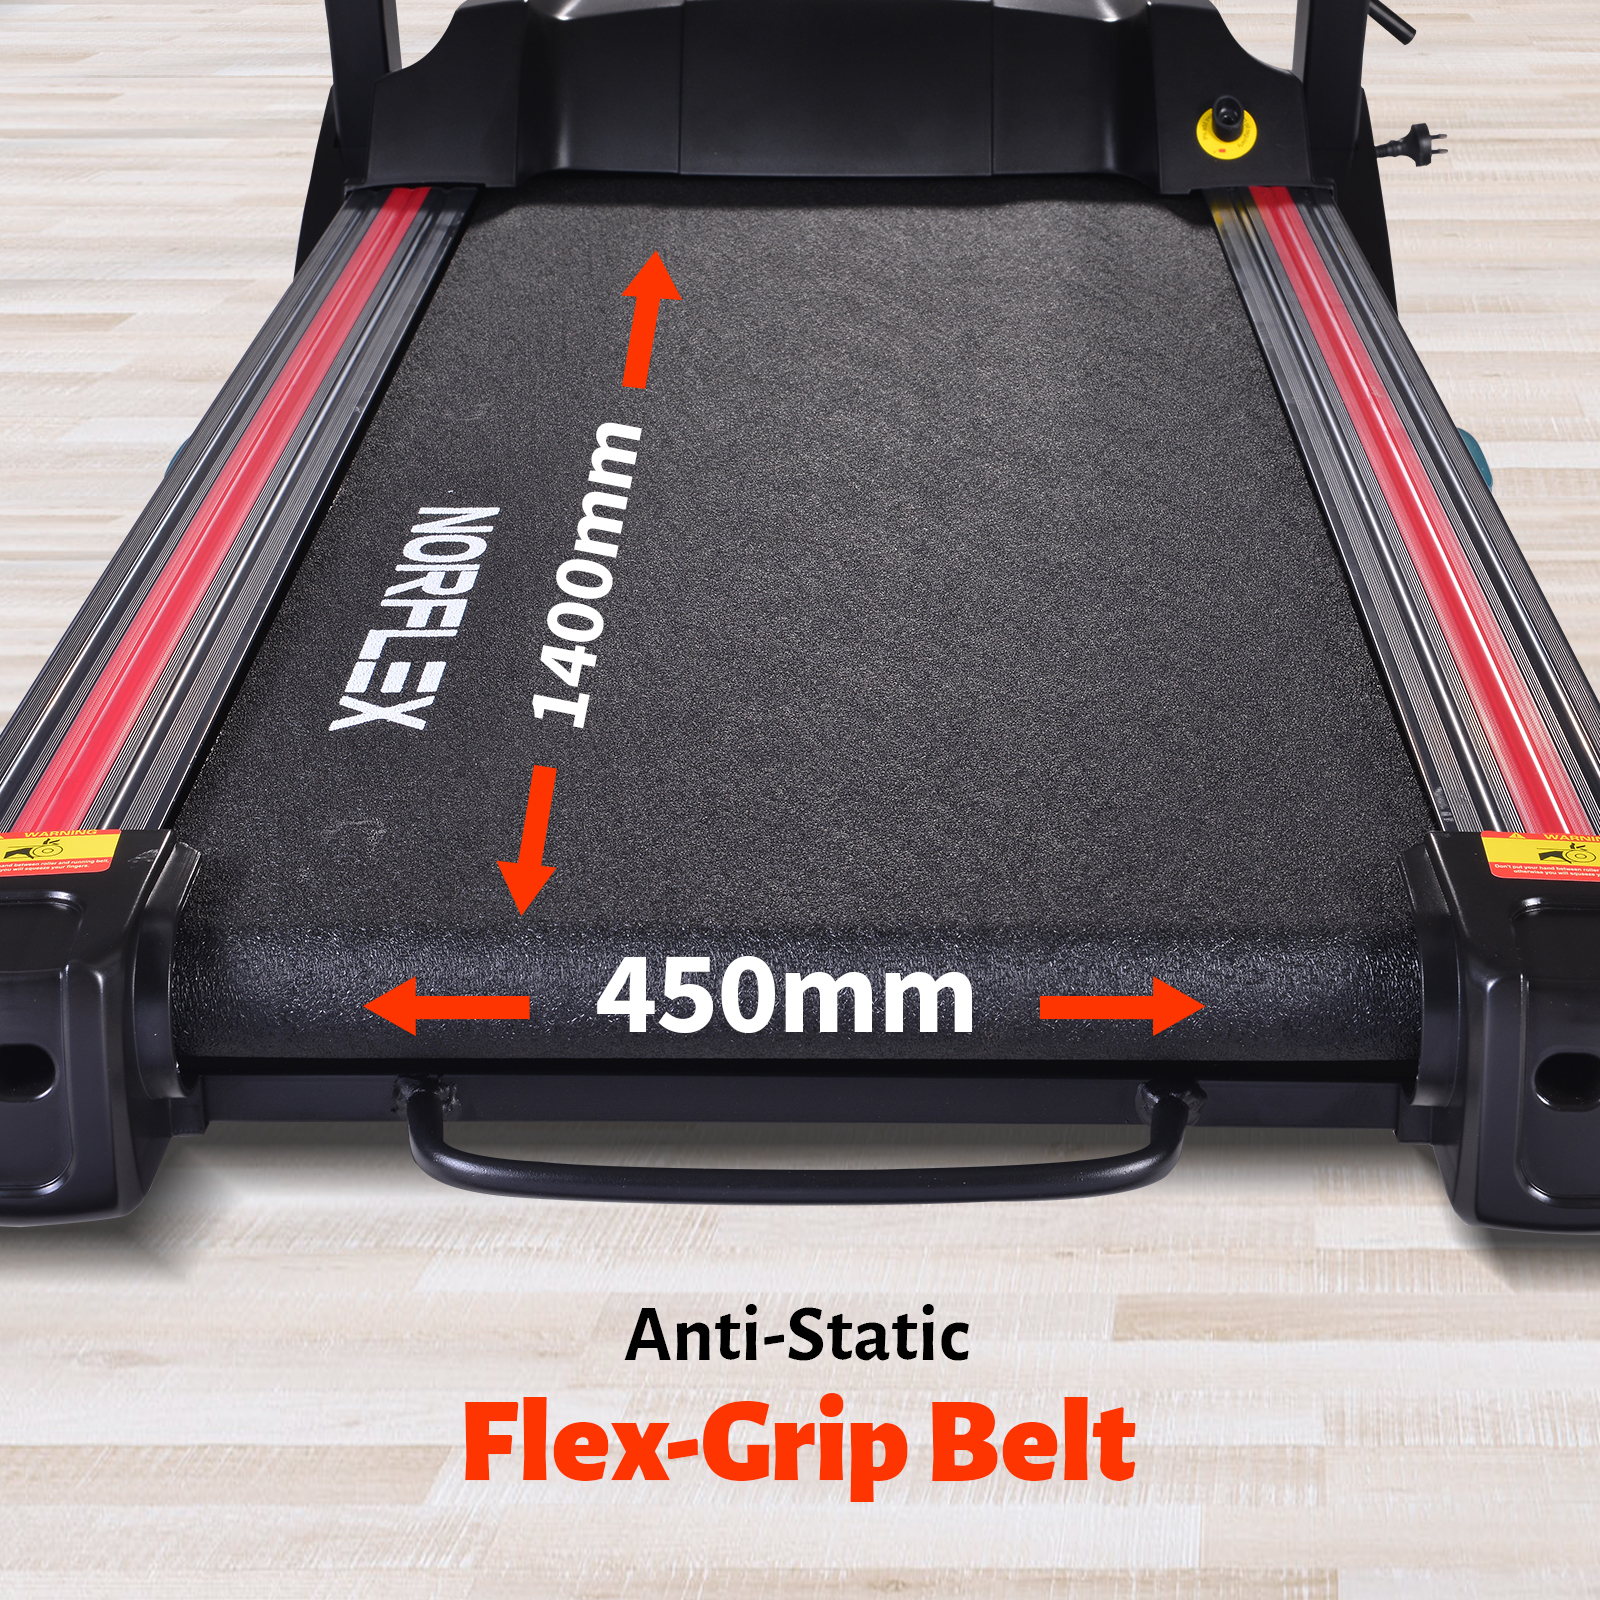 NORFLX 450mm Belt Auto Incline Treadmill Gym Exercise Machine Fitness Tracker